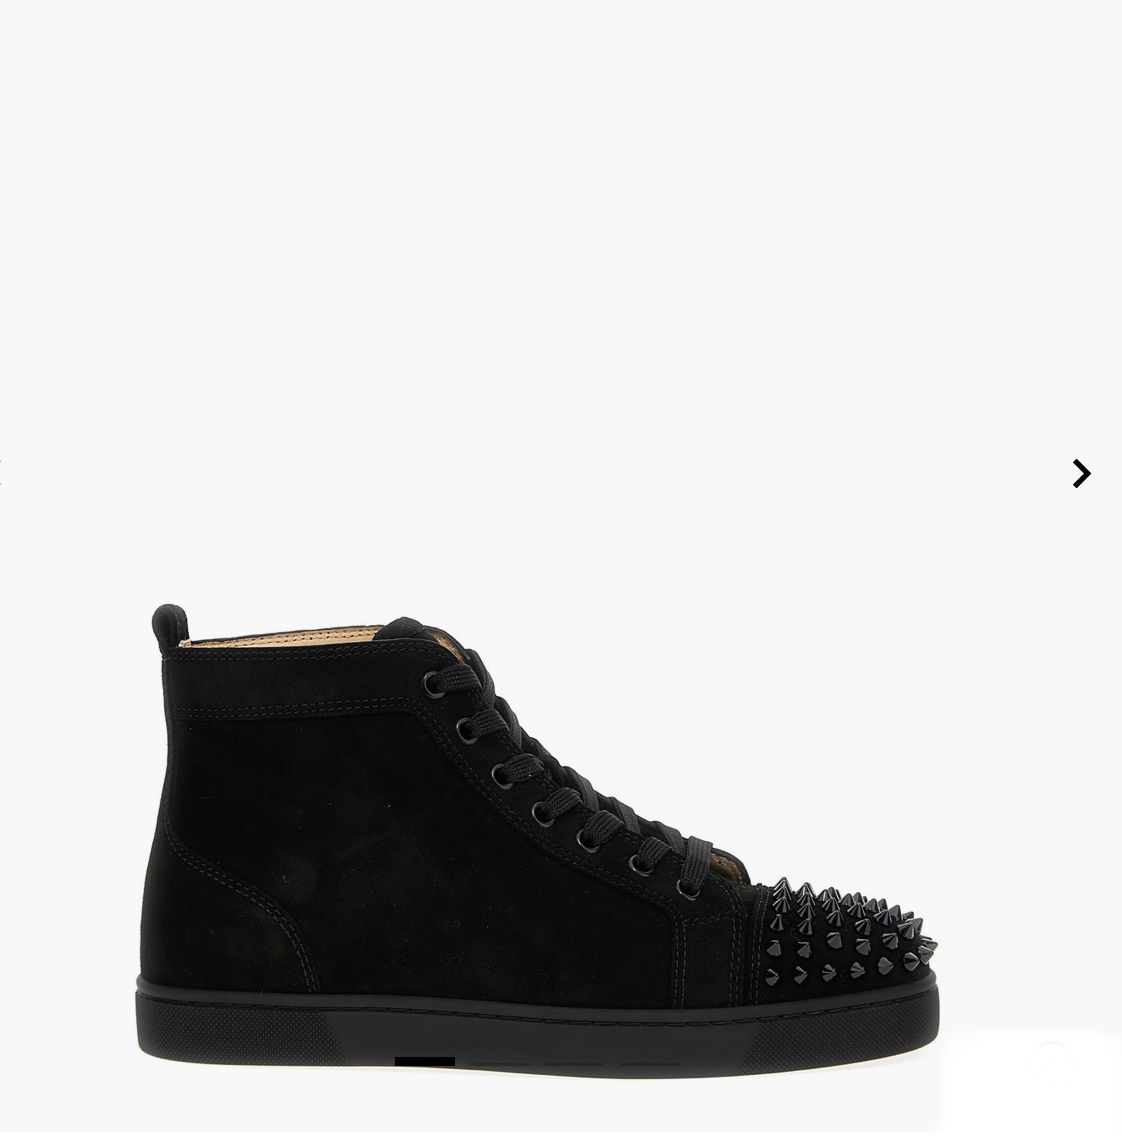 Black Christian louboutin, 'Lou Spikes Flat' suede sneakers with tonal studs on the toe, side metal logo, Size 9.5